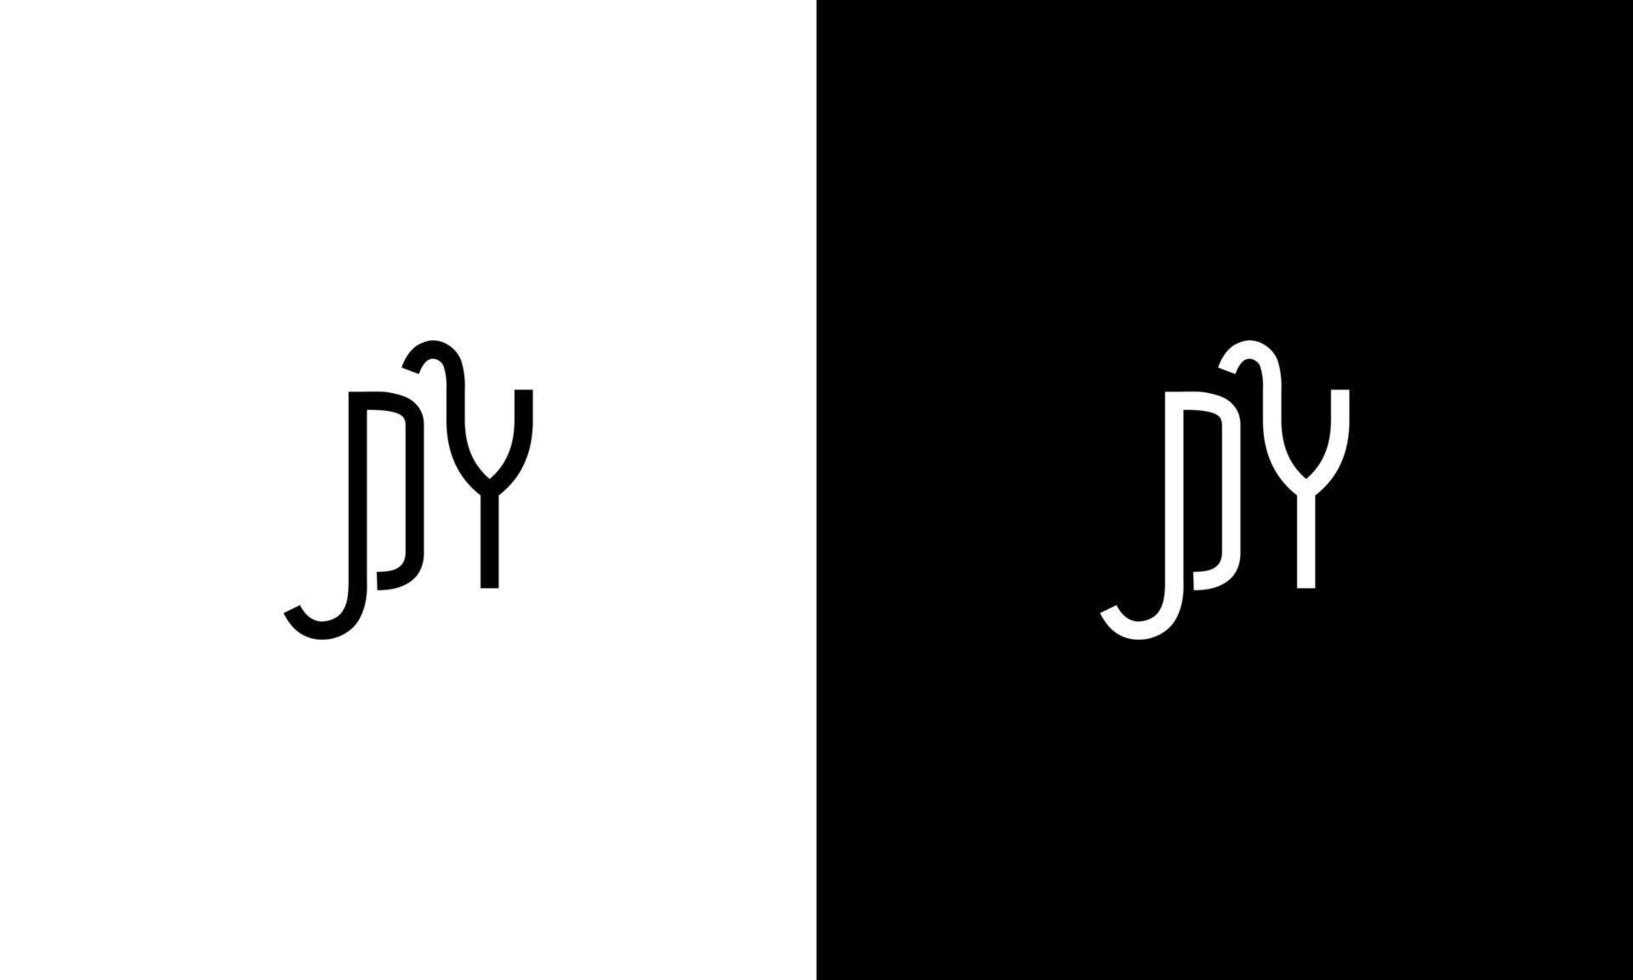 DY logo design. Letter DY logo design. DY initial logo icon design in black and white colors free vector template.